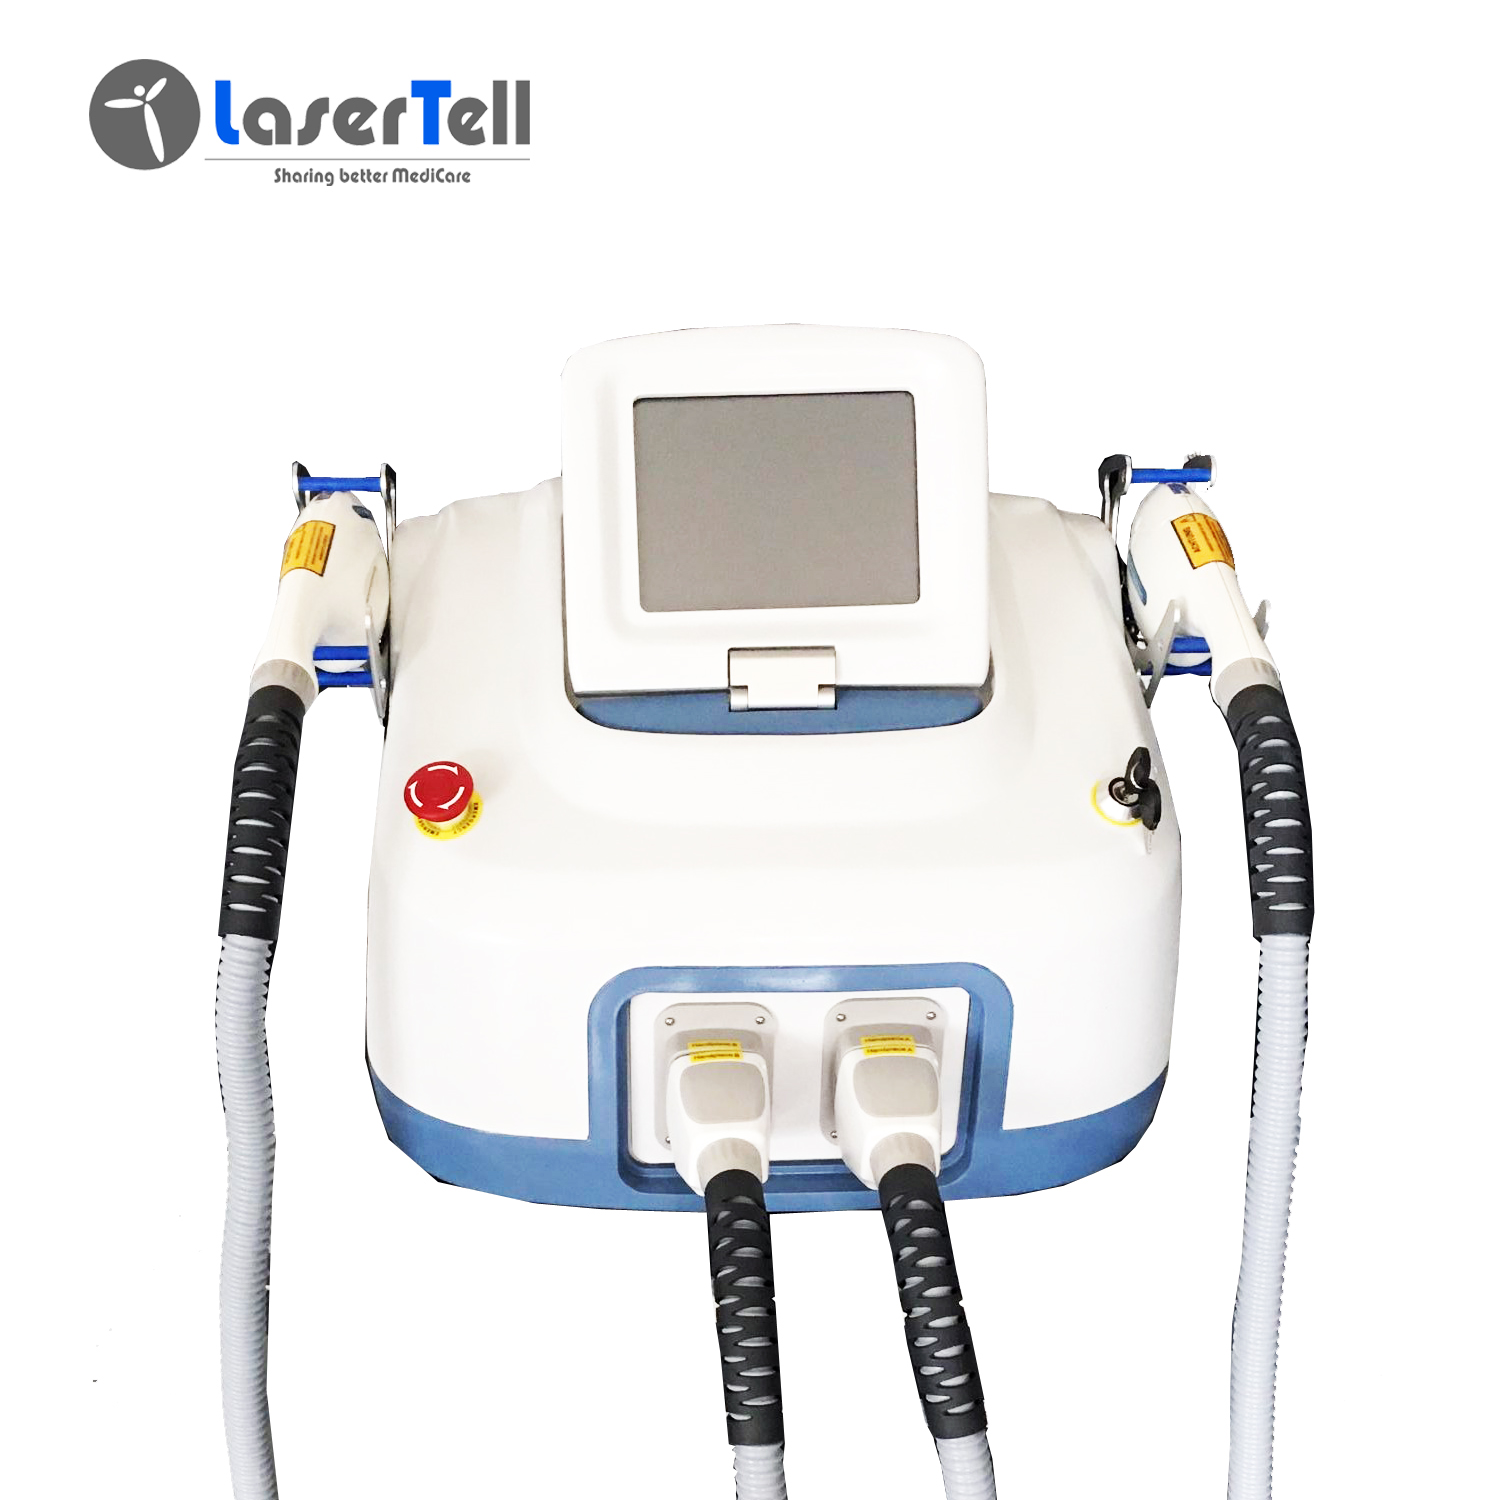 LaserTell 2 in 1 powerful portable ipl laser hair removal machines/ ipl opt shr for hair and skin treatment